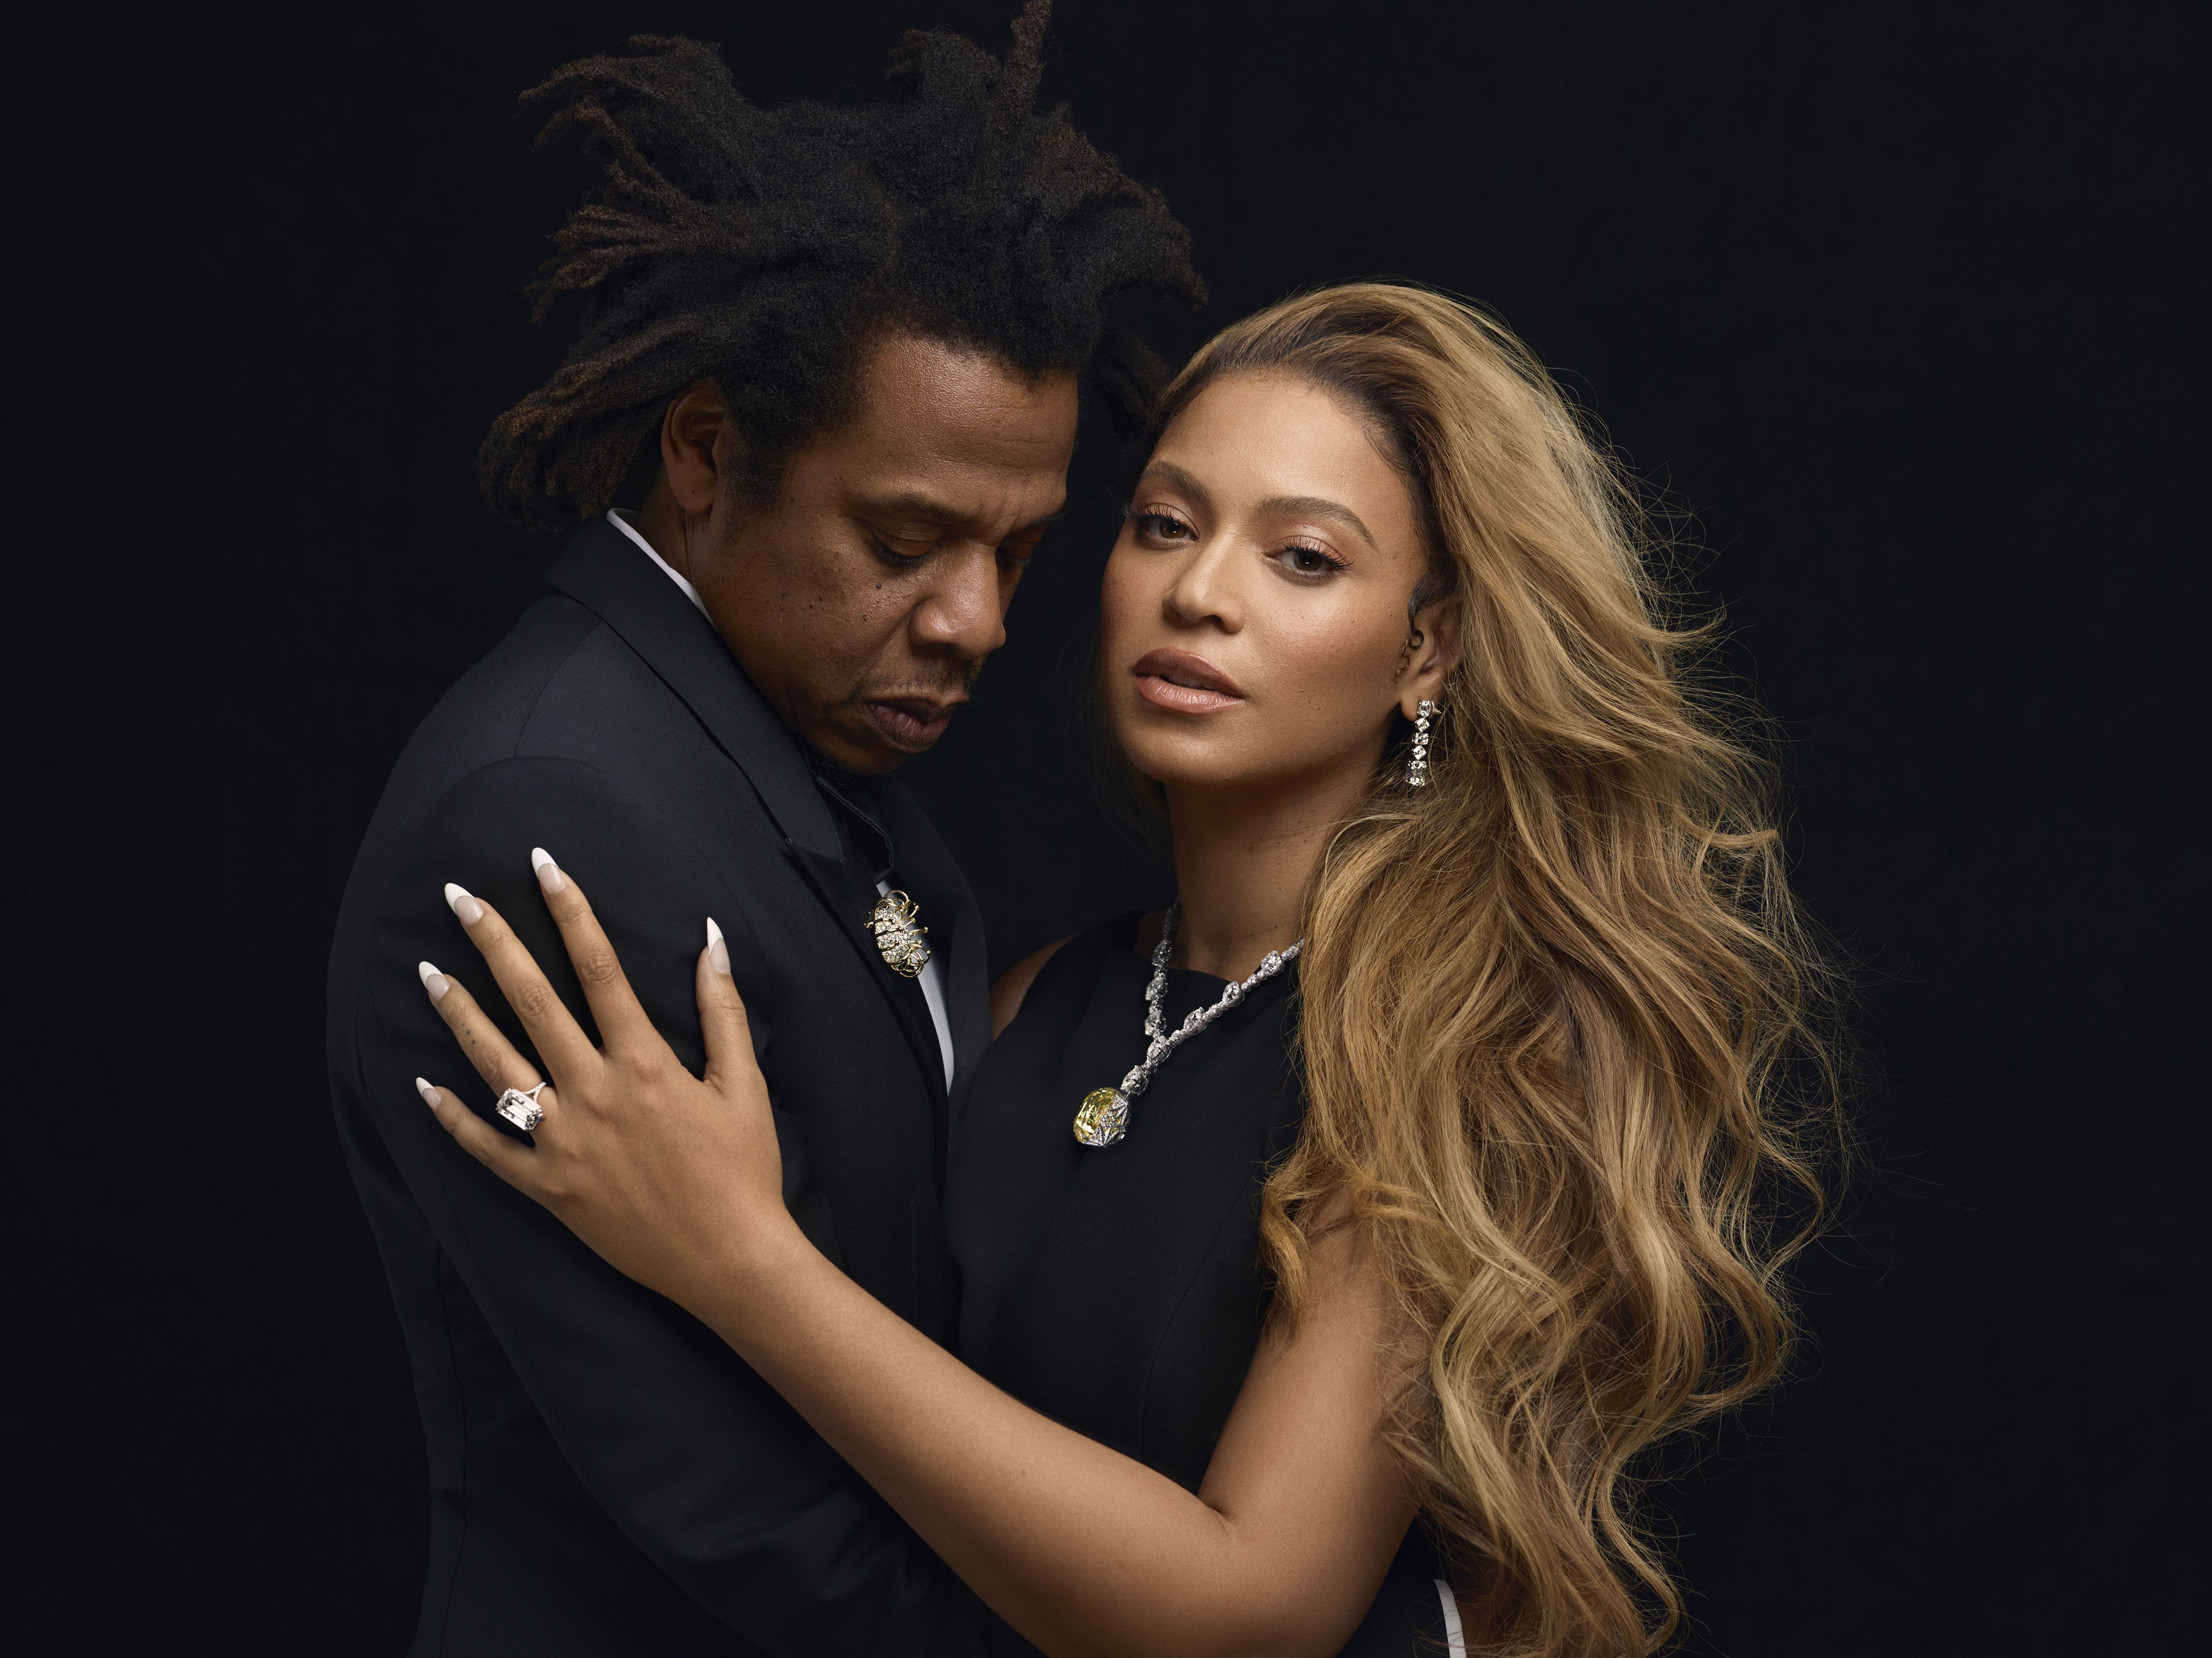 Beyoncé and Jay Z: A decade of hip hop domination